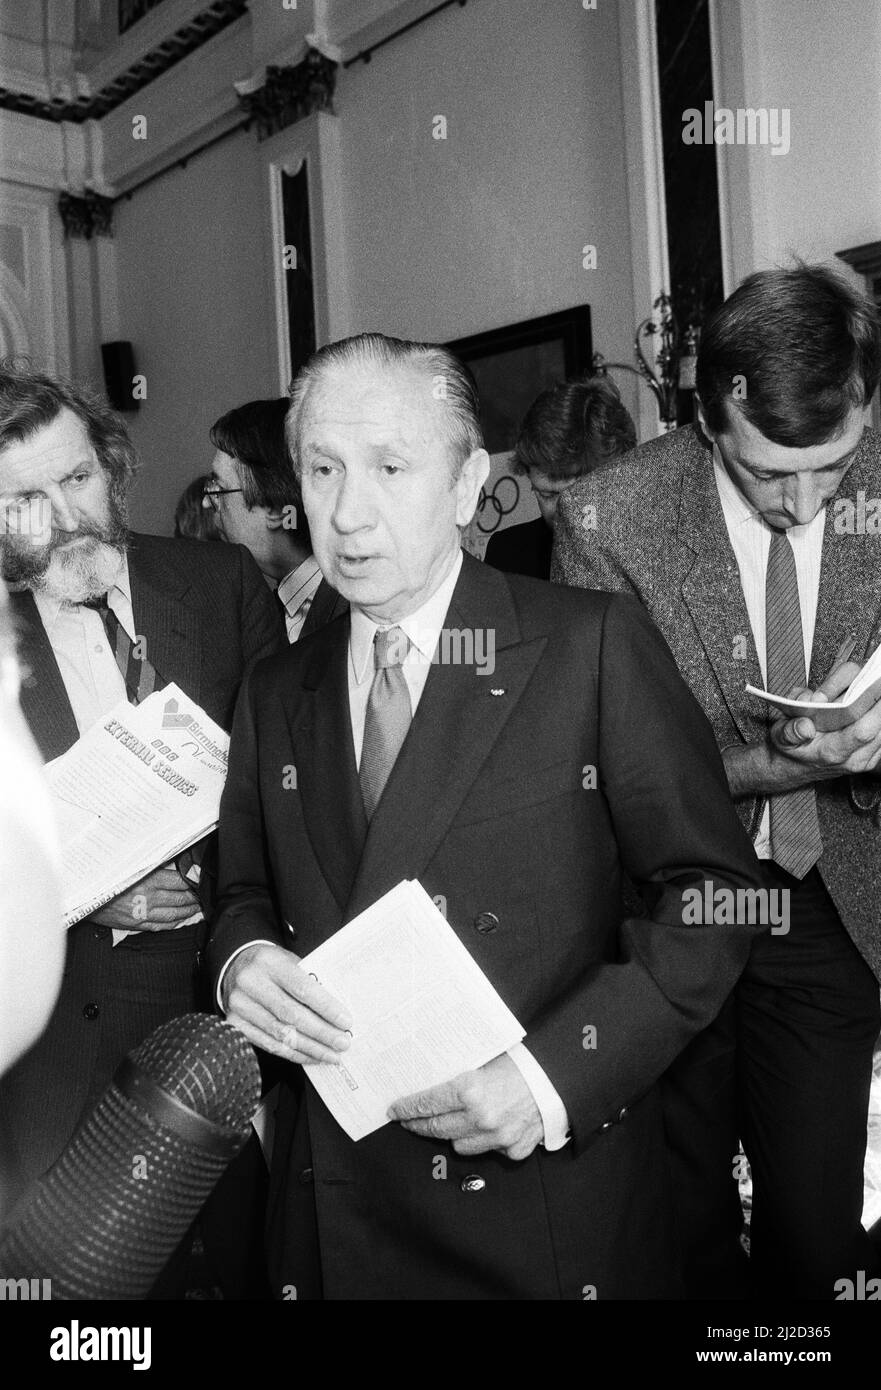 Juan Antonio Samaranch, President of the International Olympic Committee on a visit to Birmingham, at the Council House, Birmingham. 7th July 1986. Stock Photo